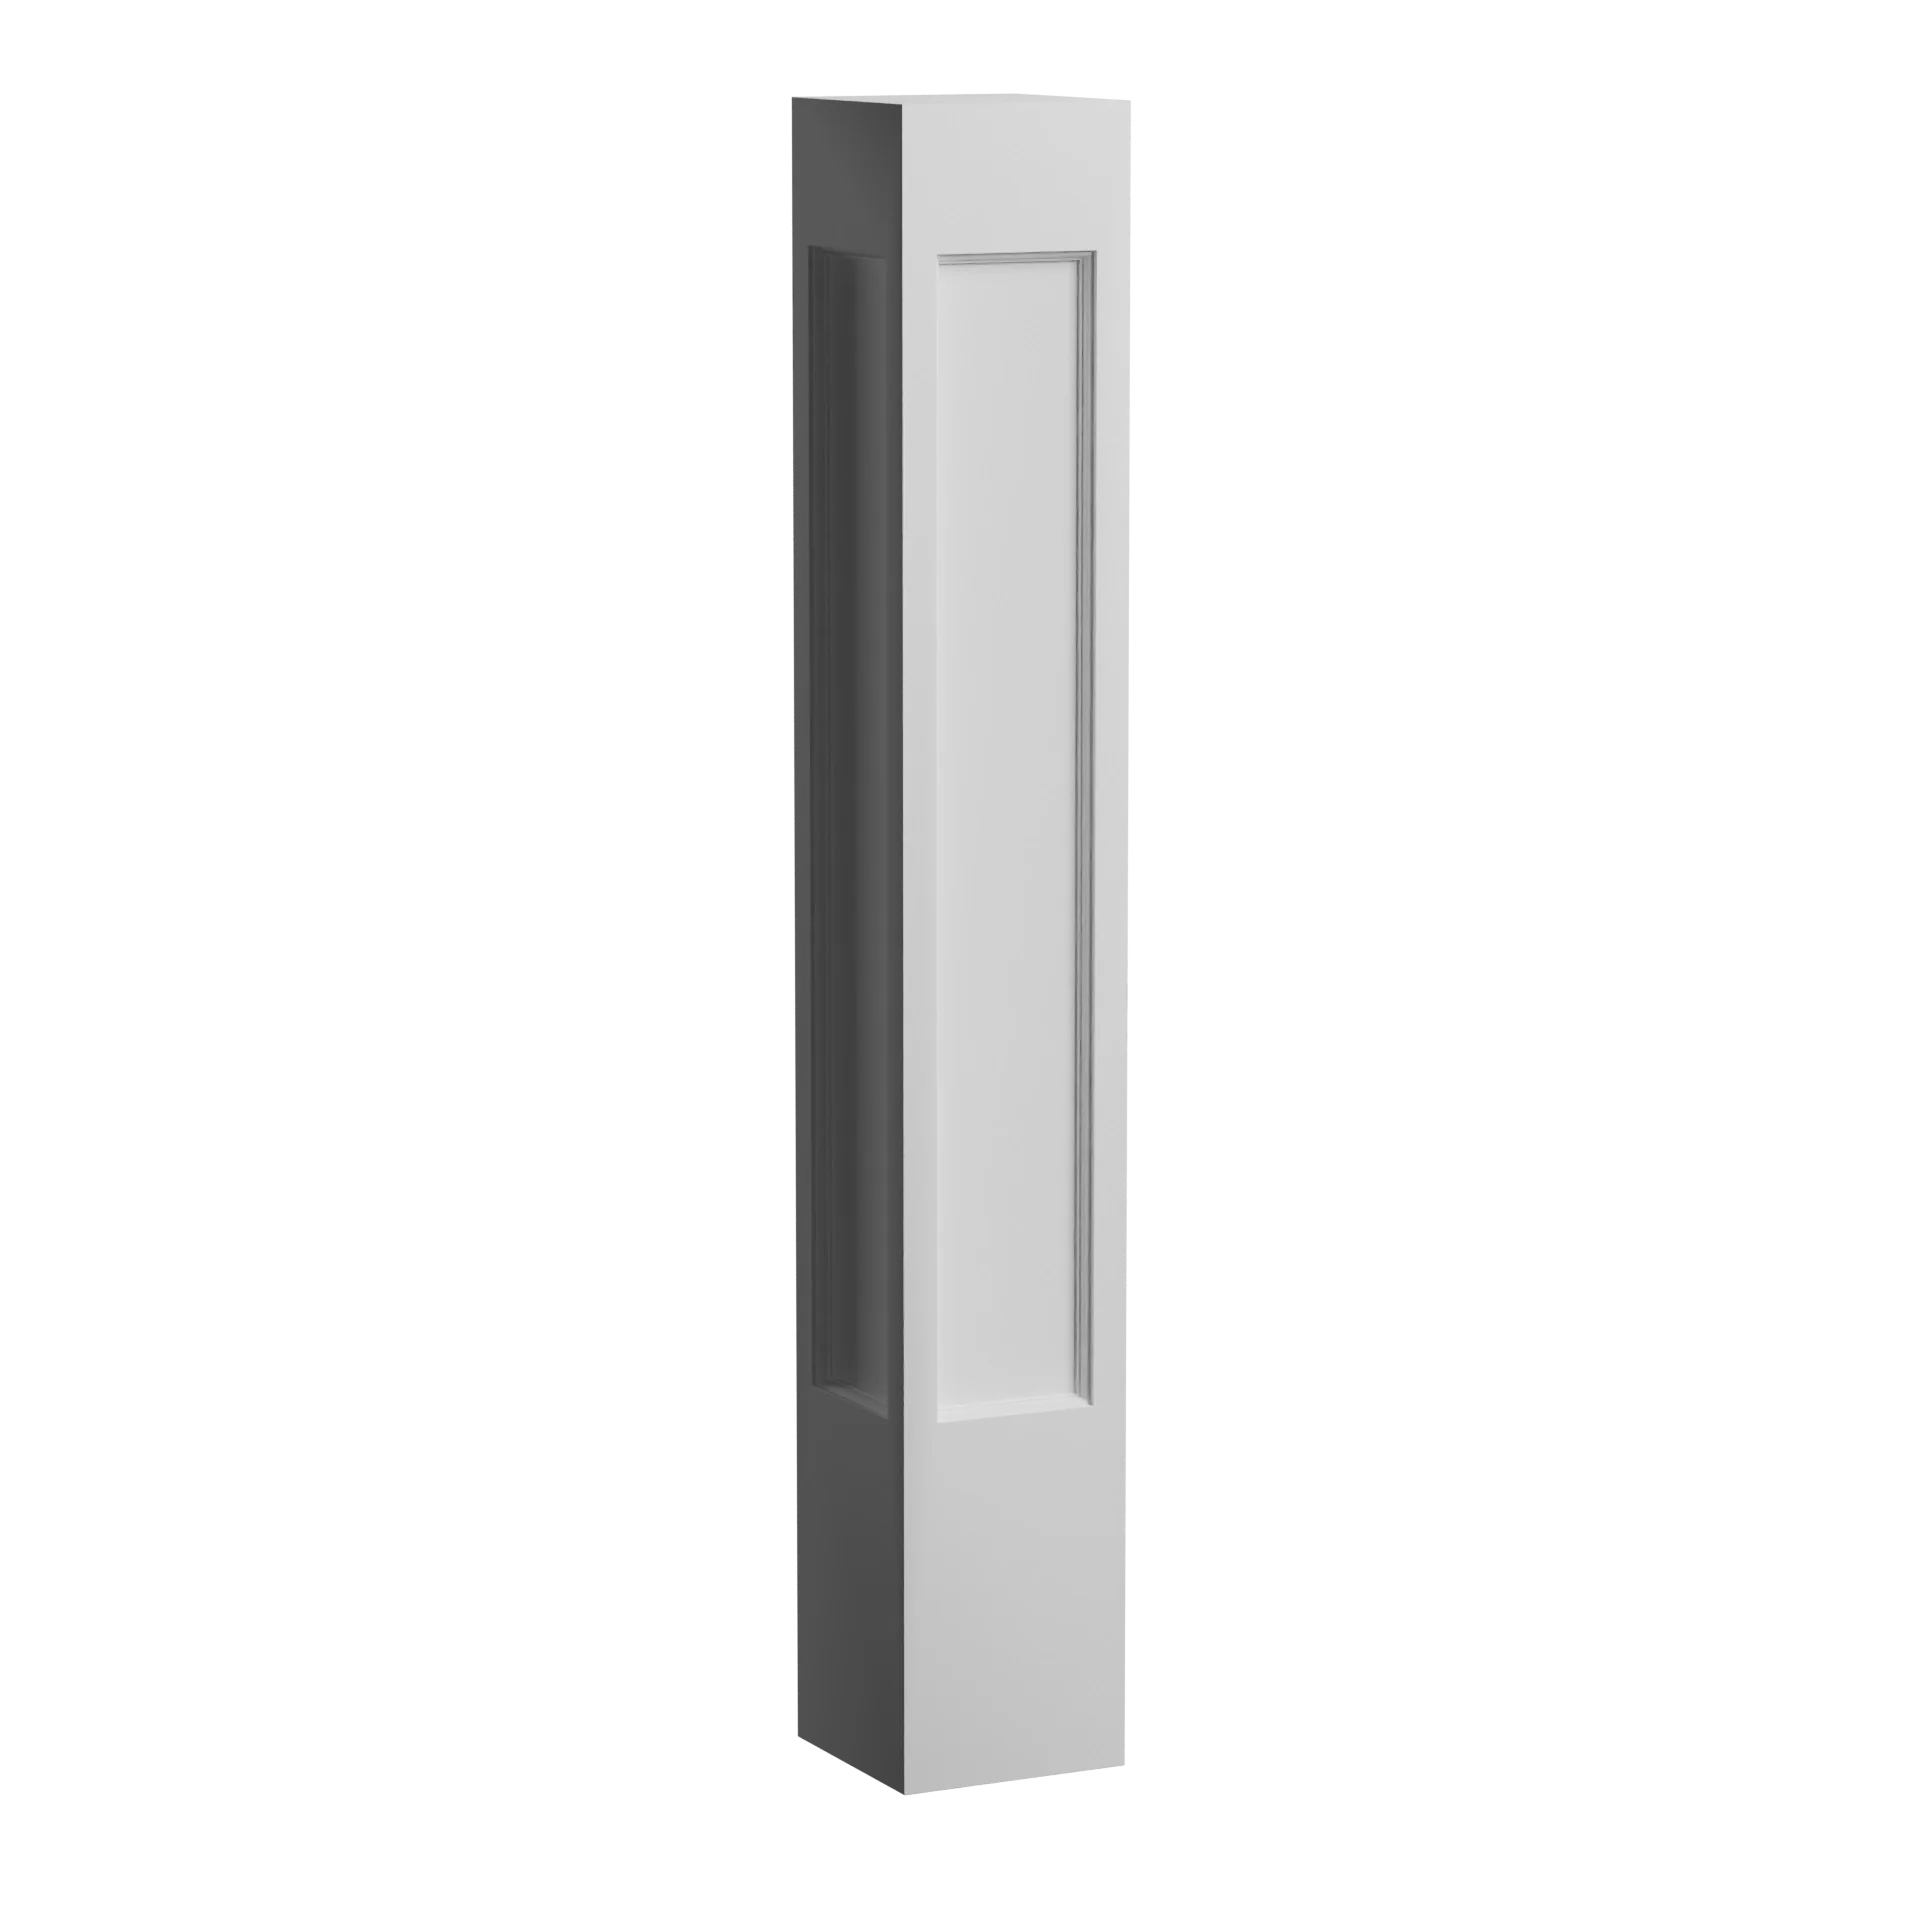 12 Inch W x 48 Inch H Recessed Flat Panel Newel Post End